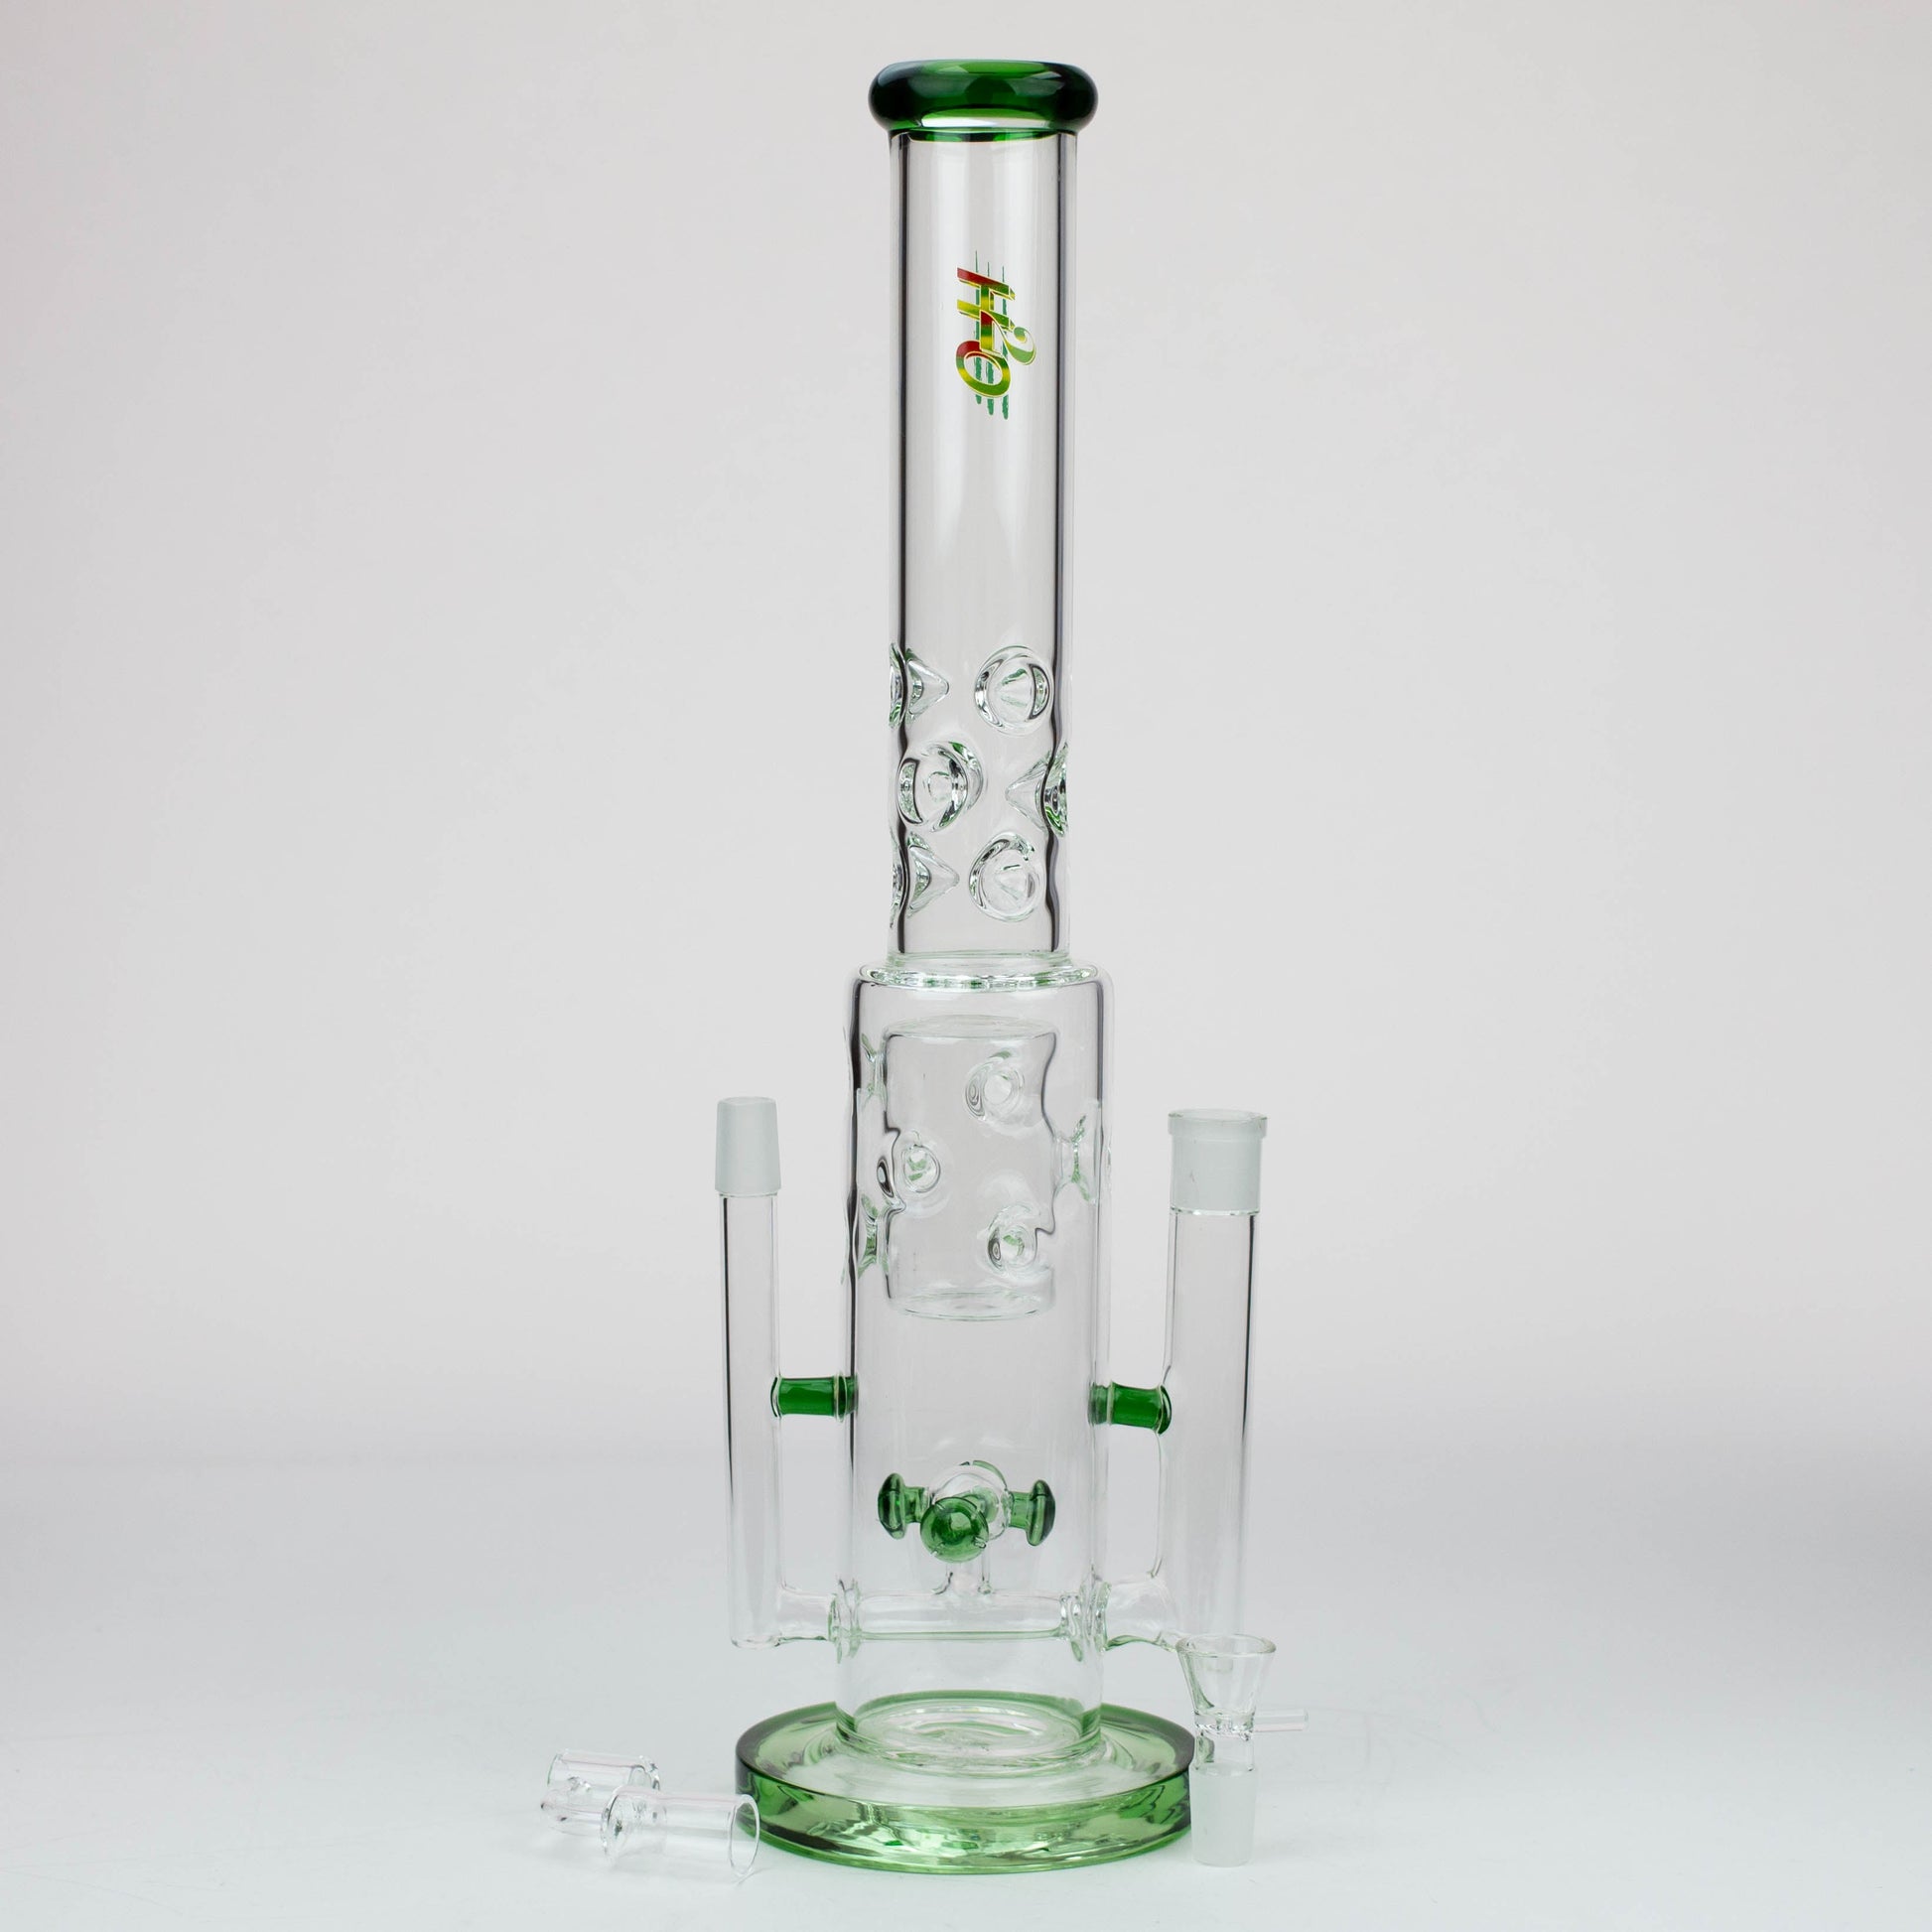 19" H2O 2-in-1 Double Joint glass water bong [H2O-22]_4